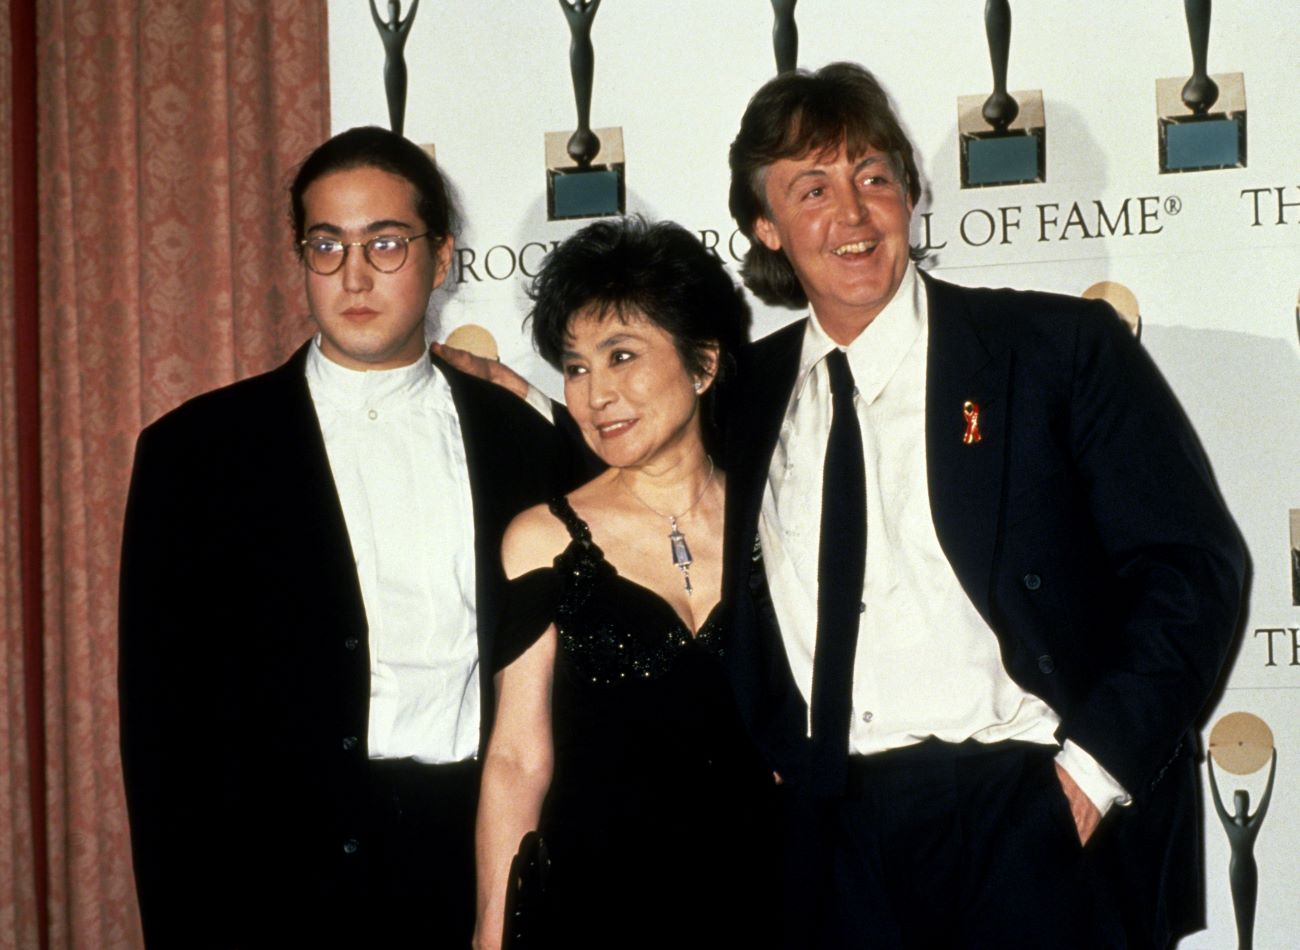 John Lennon's son Sean, Yoko Ono, and Paul McCartney at the Rock & Roll Hall of Fame together.